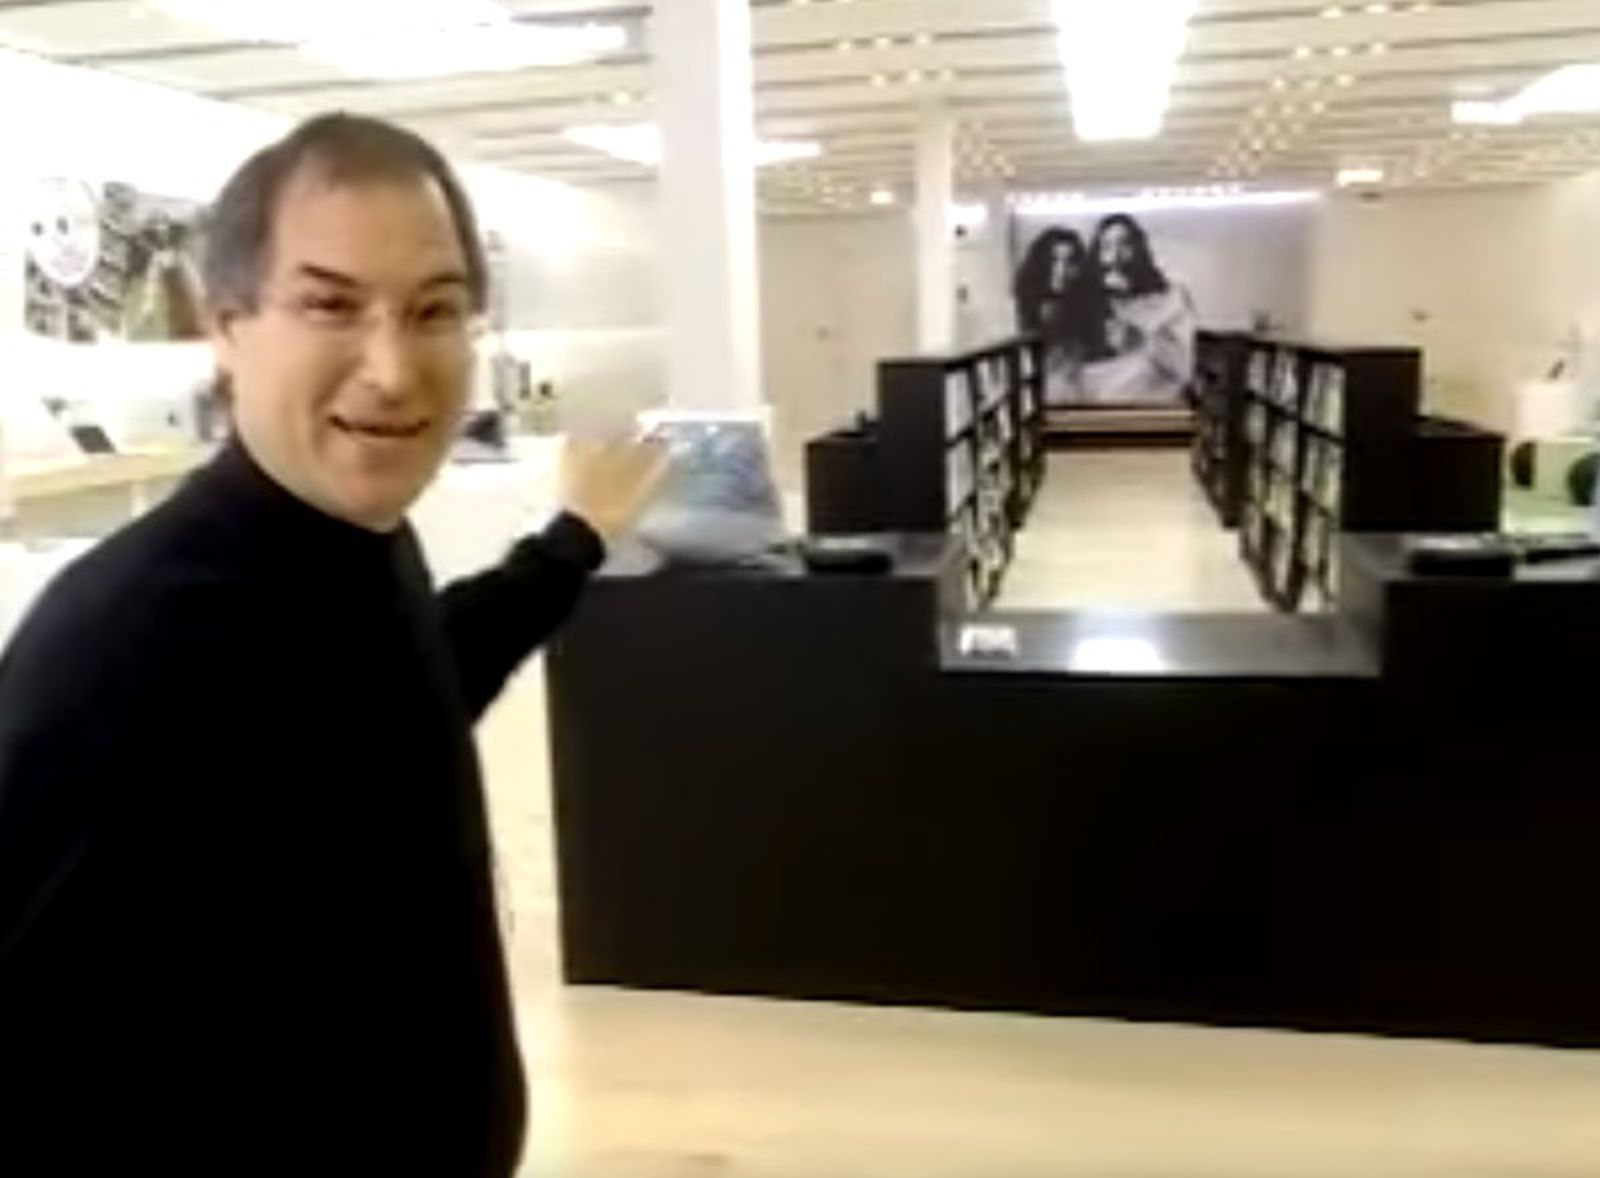 Apple Stores: How Apple started its retail chain in 2001